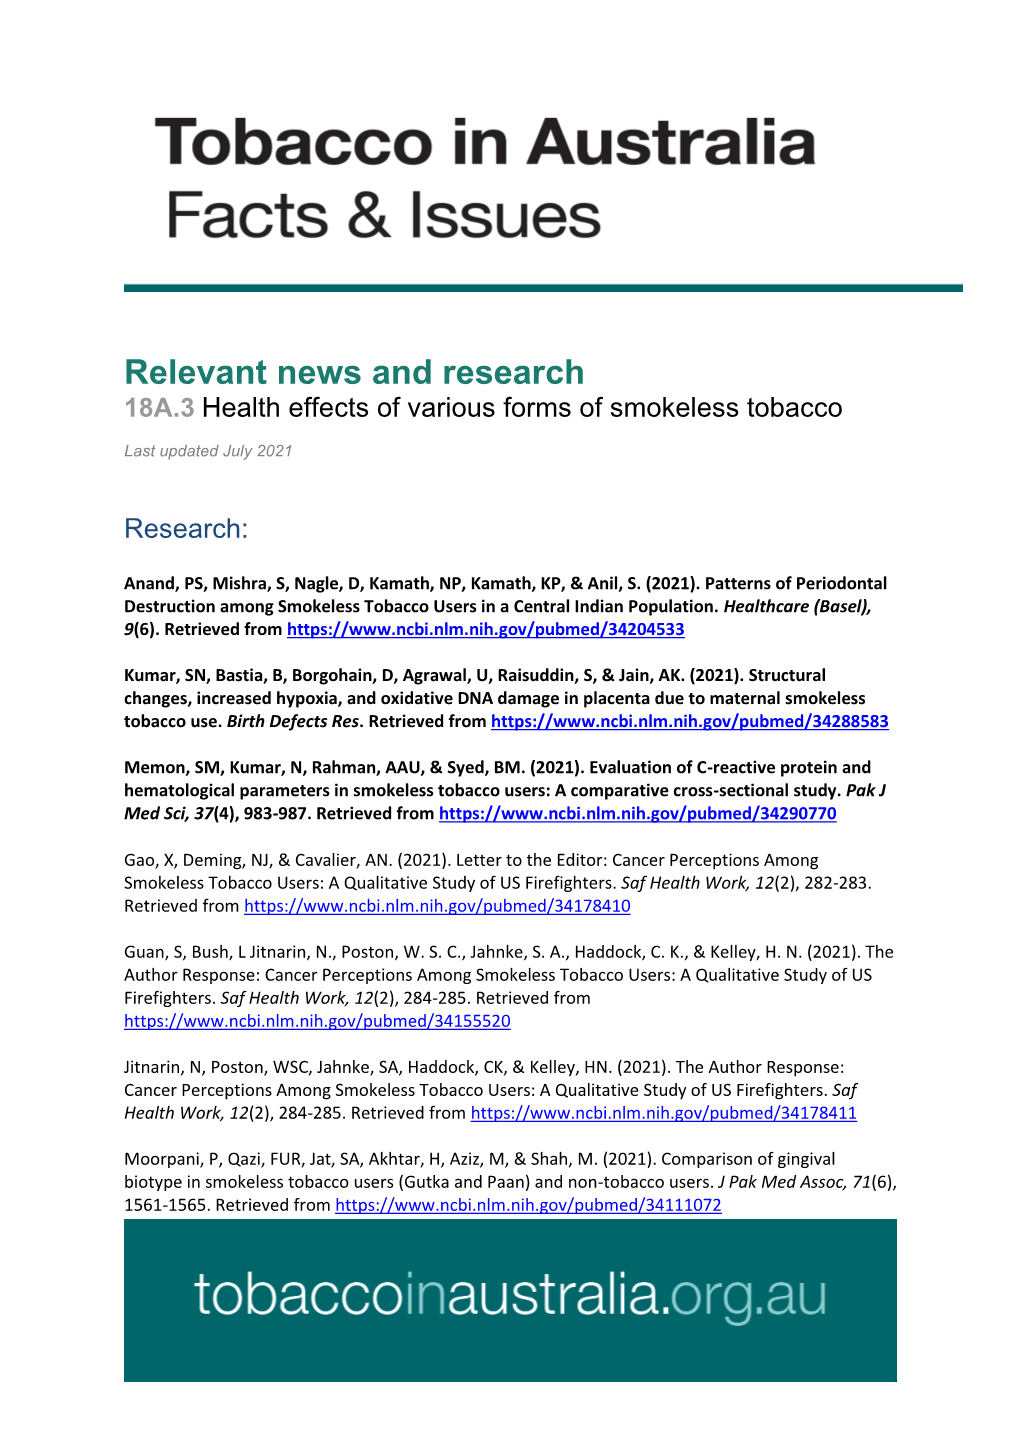 Relevant News and Research 18A.3 Health Effects of Various Forms of Smokeless Tobacco